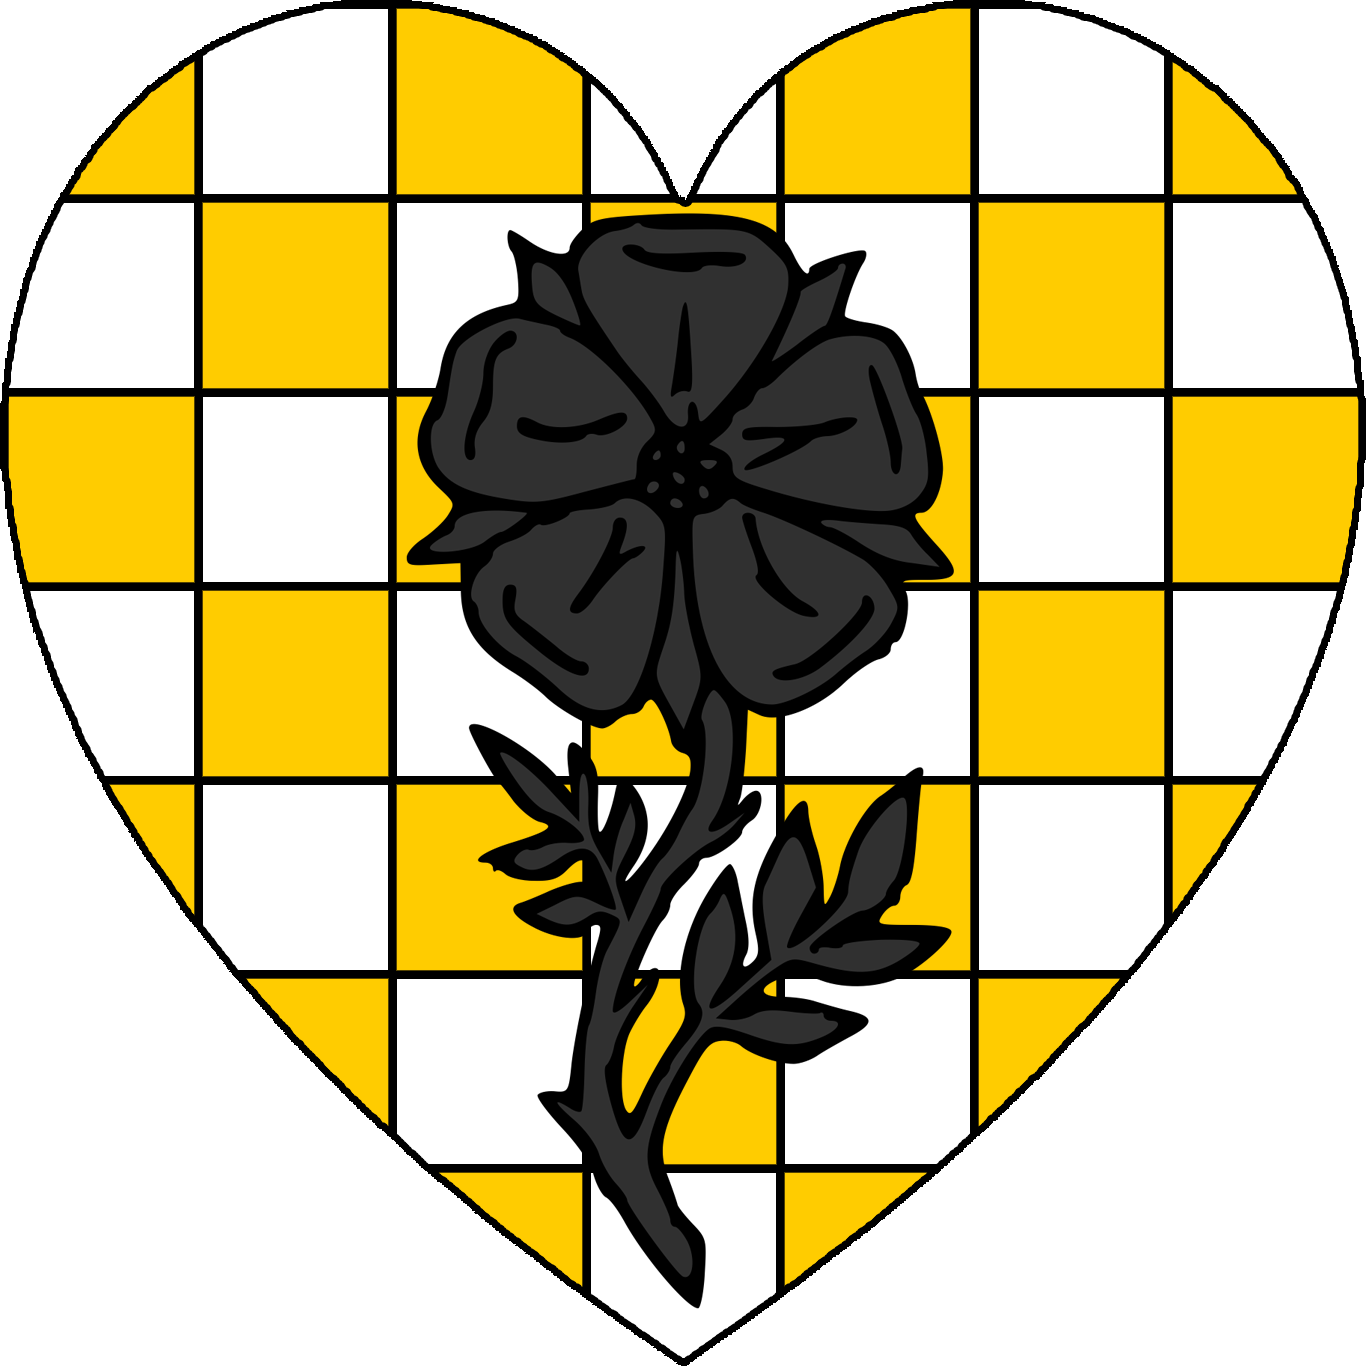 (Fieldless) On a heart checky Or and argent, a rose slipped and leaved sable.